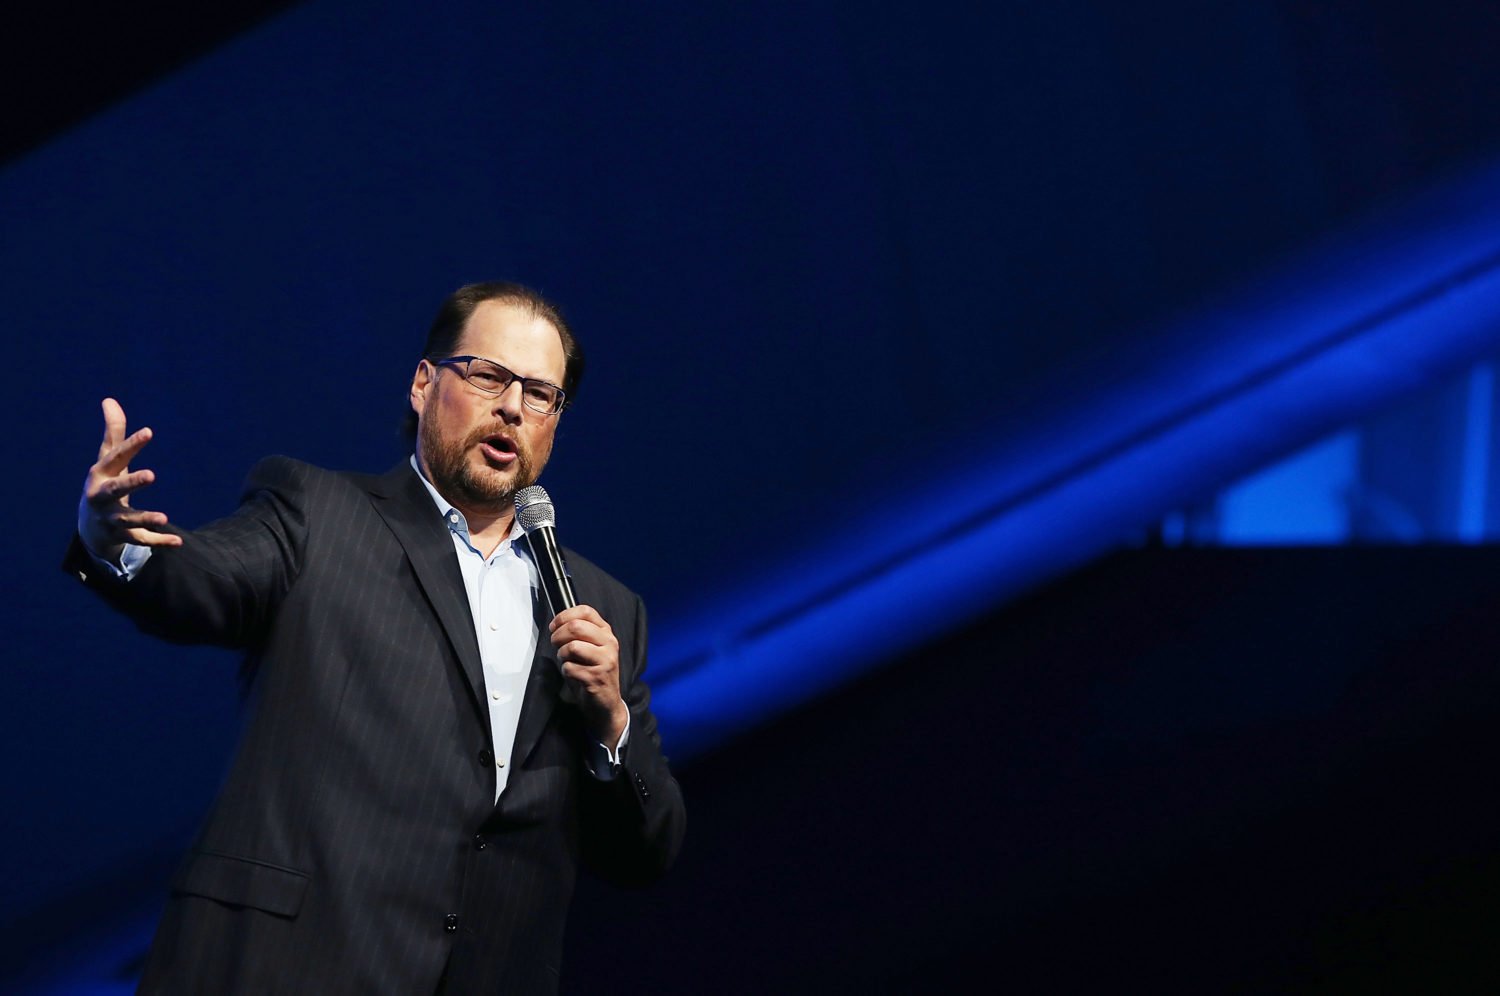 SAN FRANCISCO, CA - OCTOBER 14: Salesforce CEO Marc Benioff speaks during the 2014 DreamForce conference on October 14, 2014 in San Francisco, California. The annual Dreamforce conference runs through October 16. (Photo by Justin Sullivan/Getty Images)